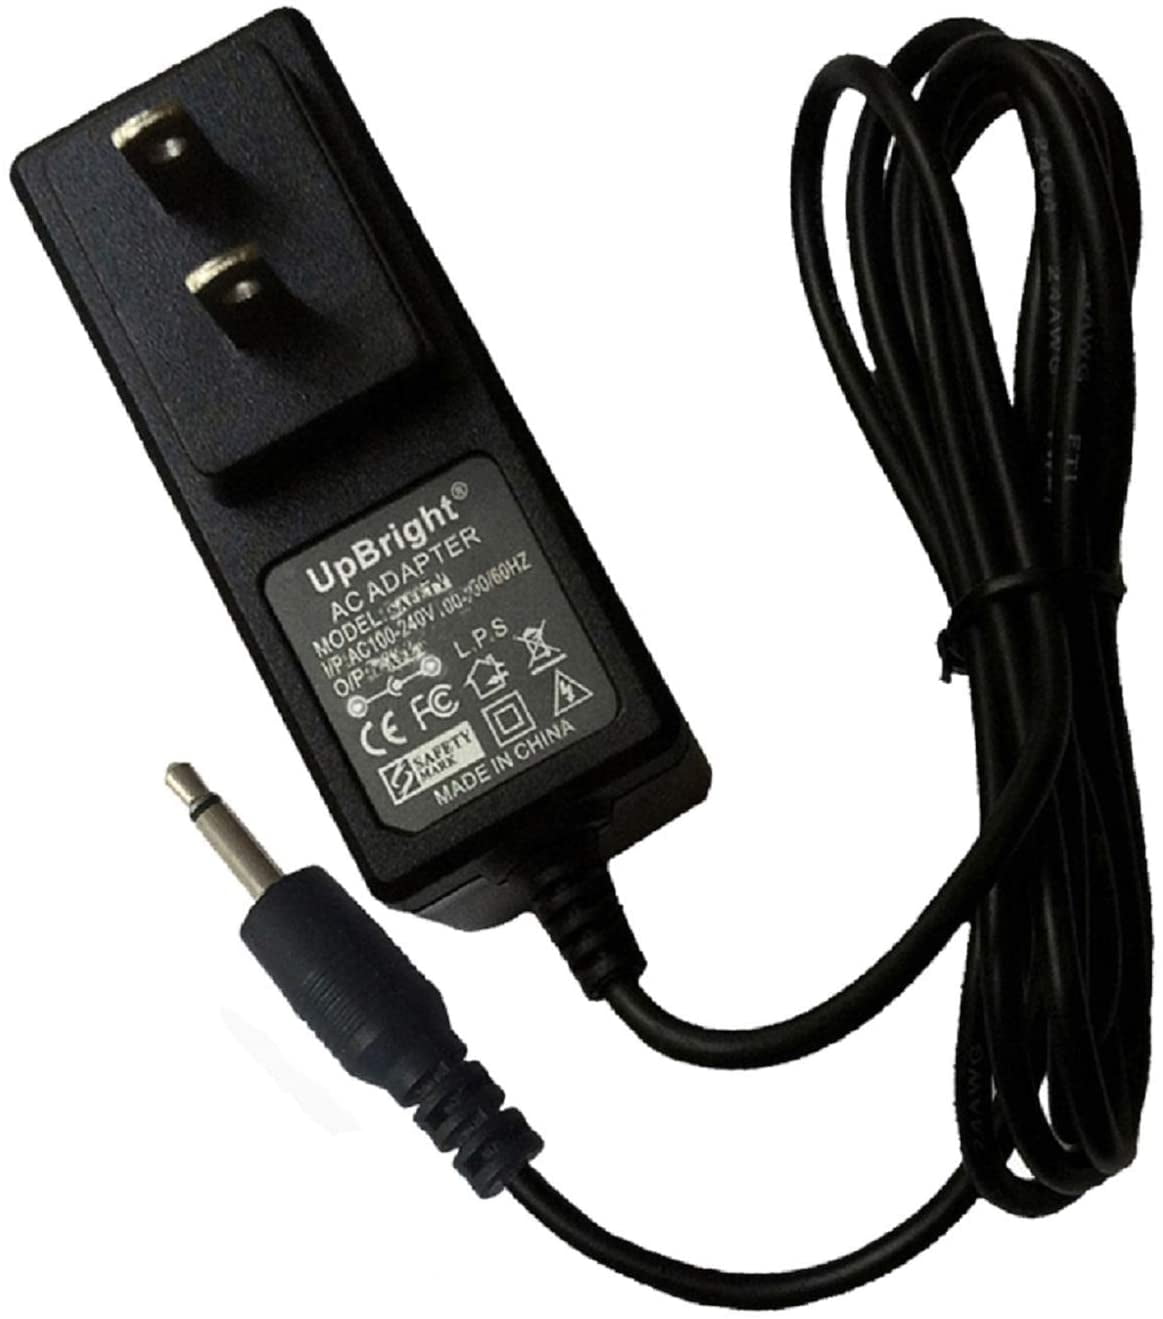 Power AC DC GOLDS GYM Spin 210 210U 390R 290U DC AC adapter Charger cord 